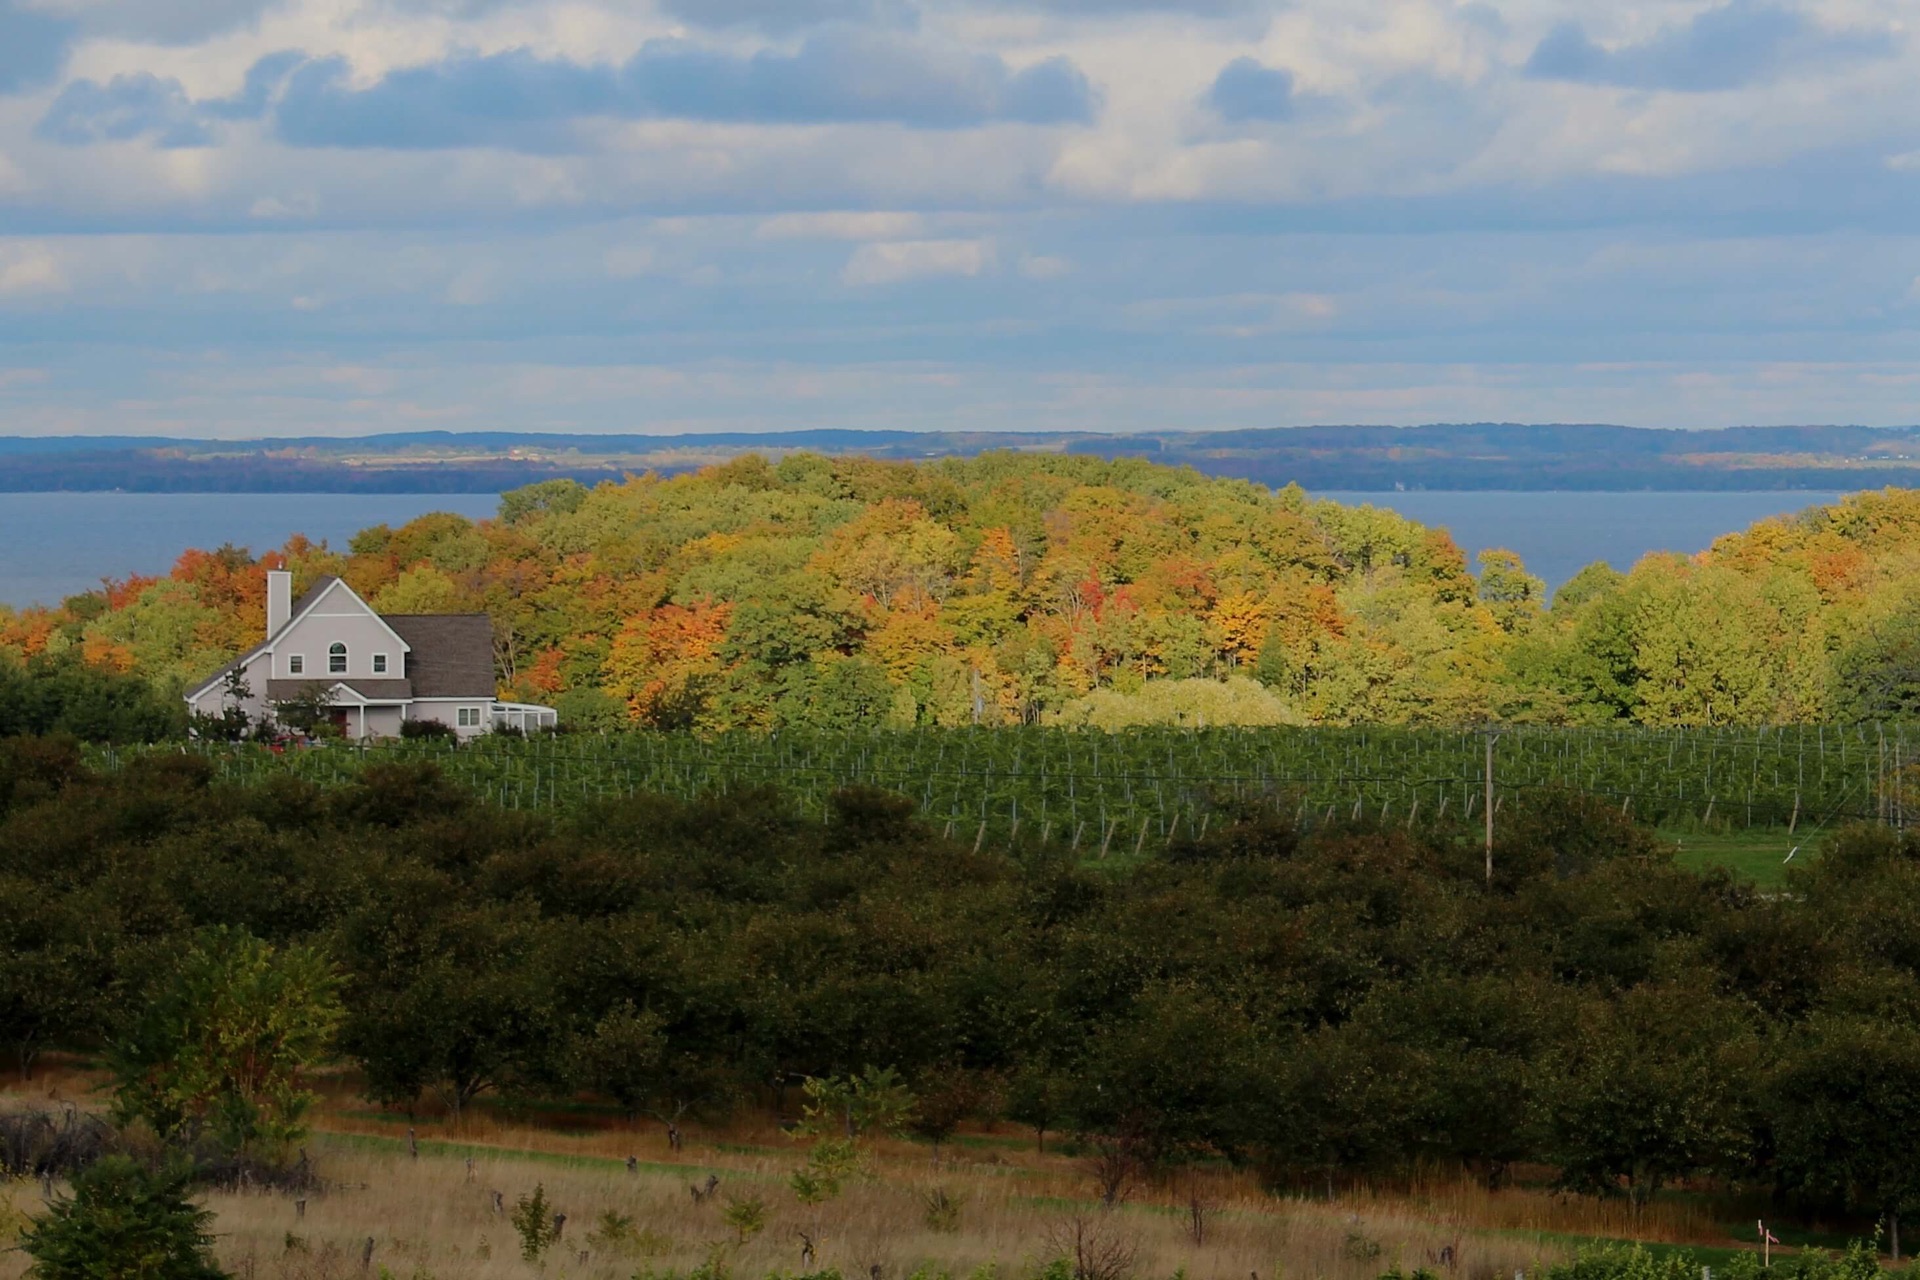 View from Chateau Chantal as sunrise shines on early autumn scene and Grand Traverse Bay